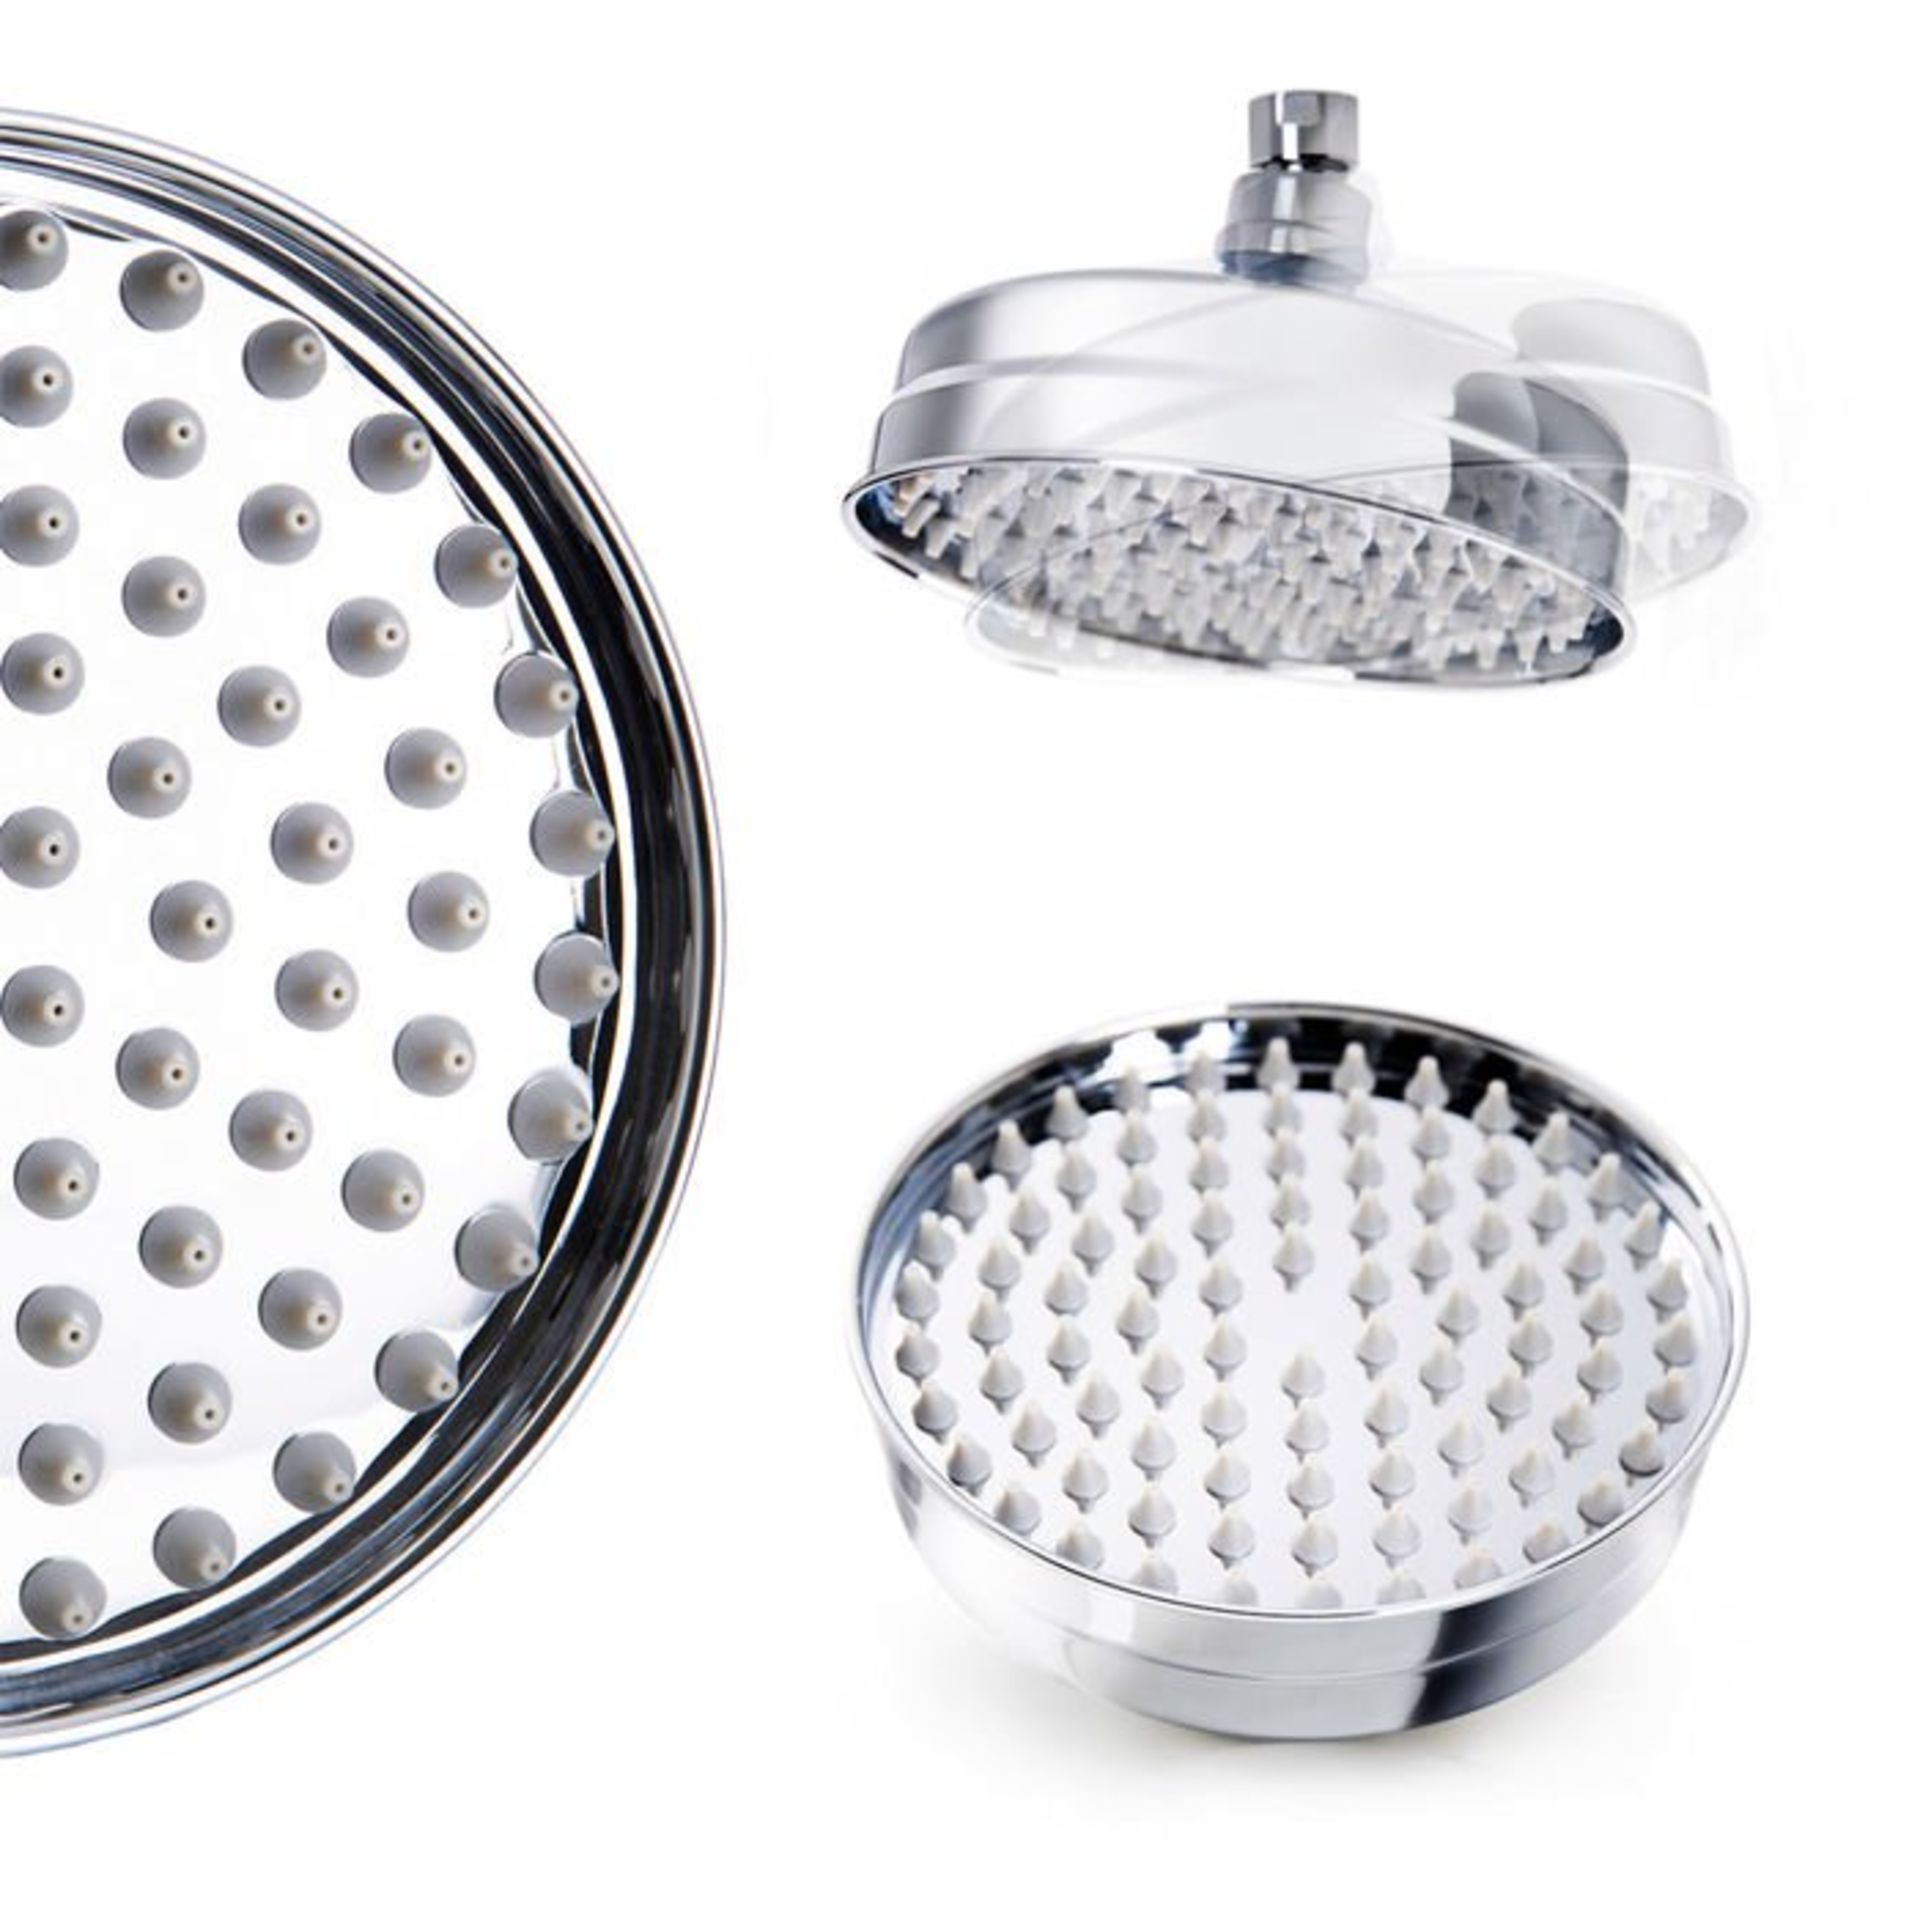 (H181) Traditional Exposed Shower Kit & Medium Head. RRP £249.99. Traditional exposed valve - Image 4 of 7